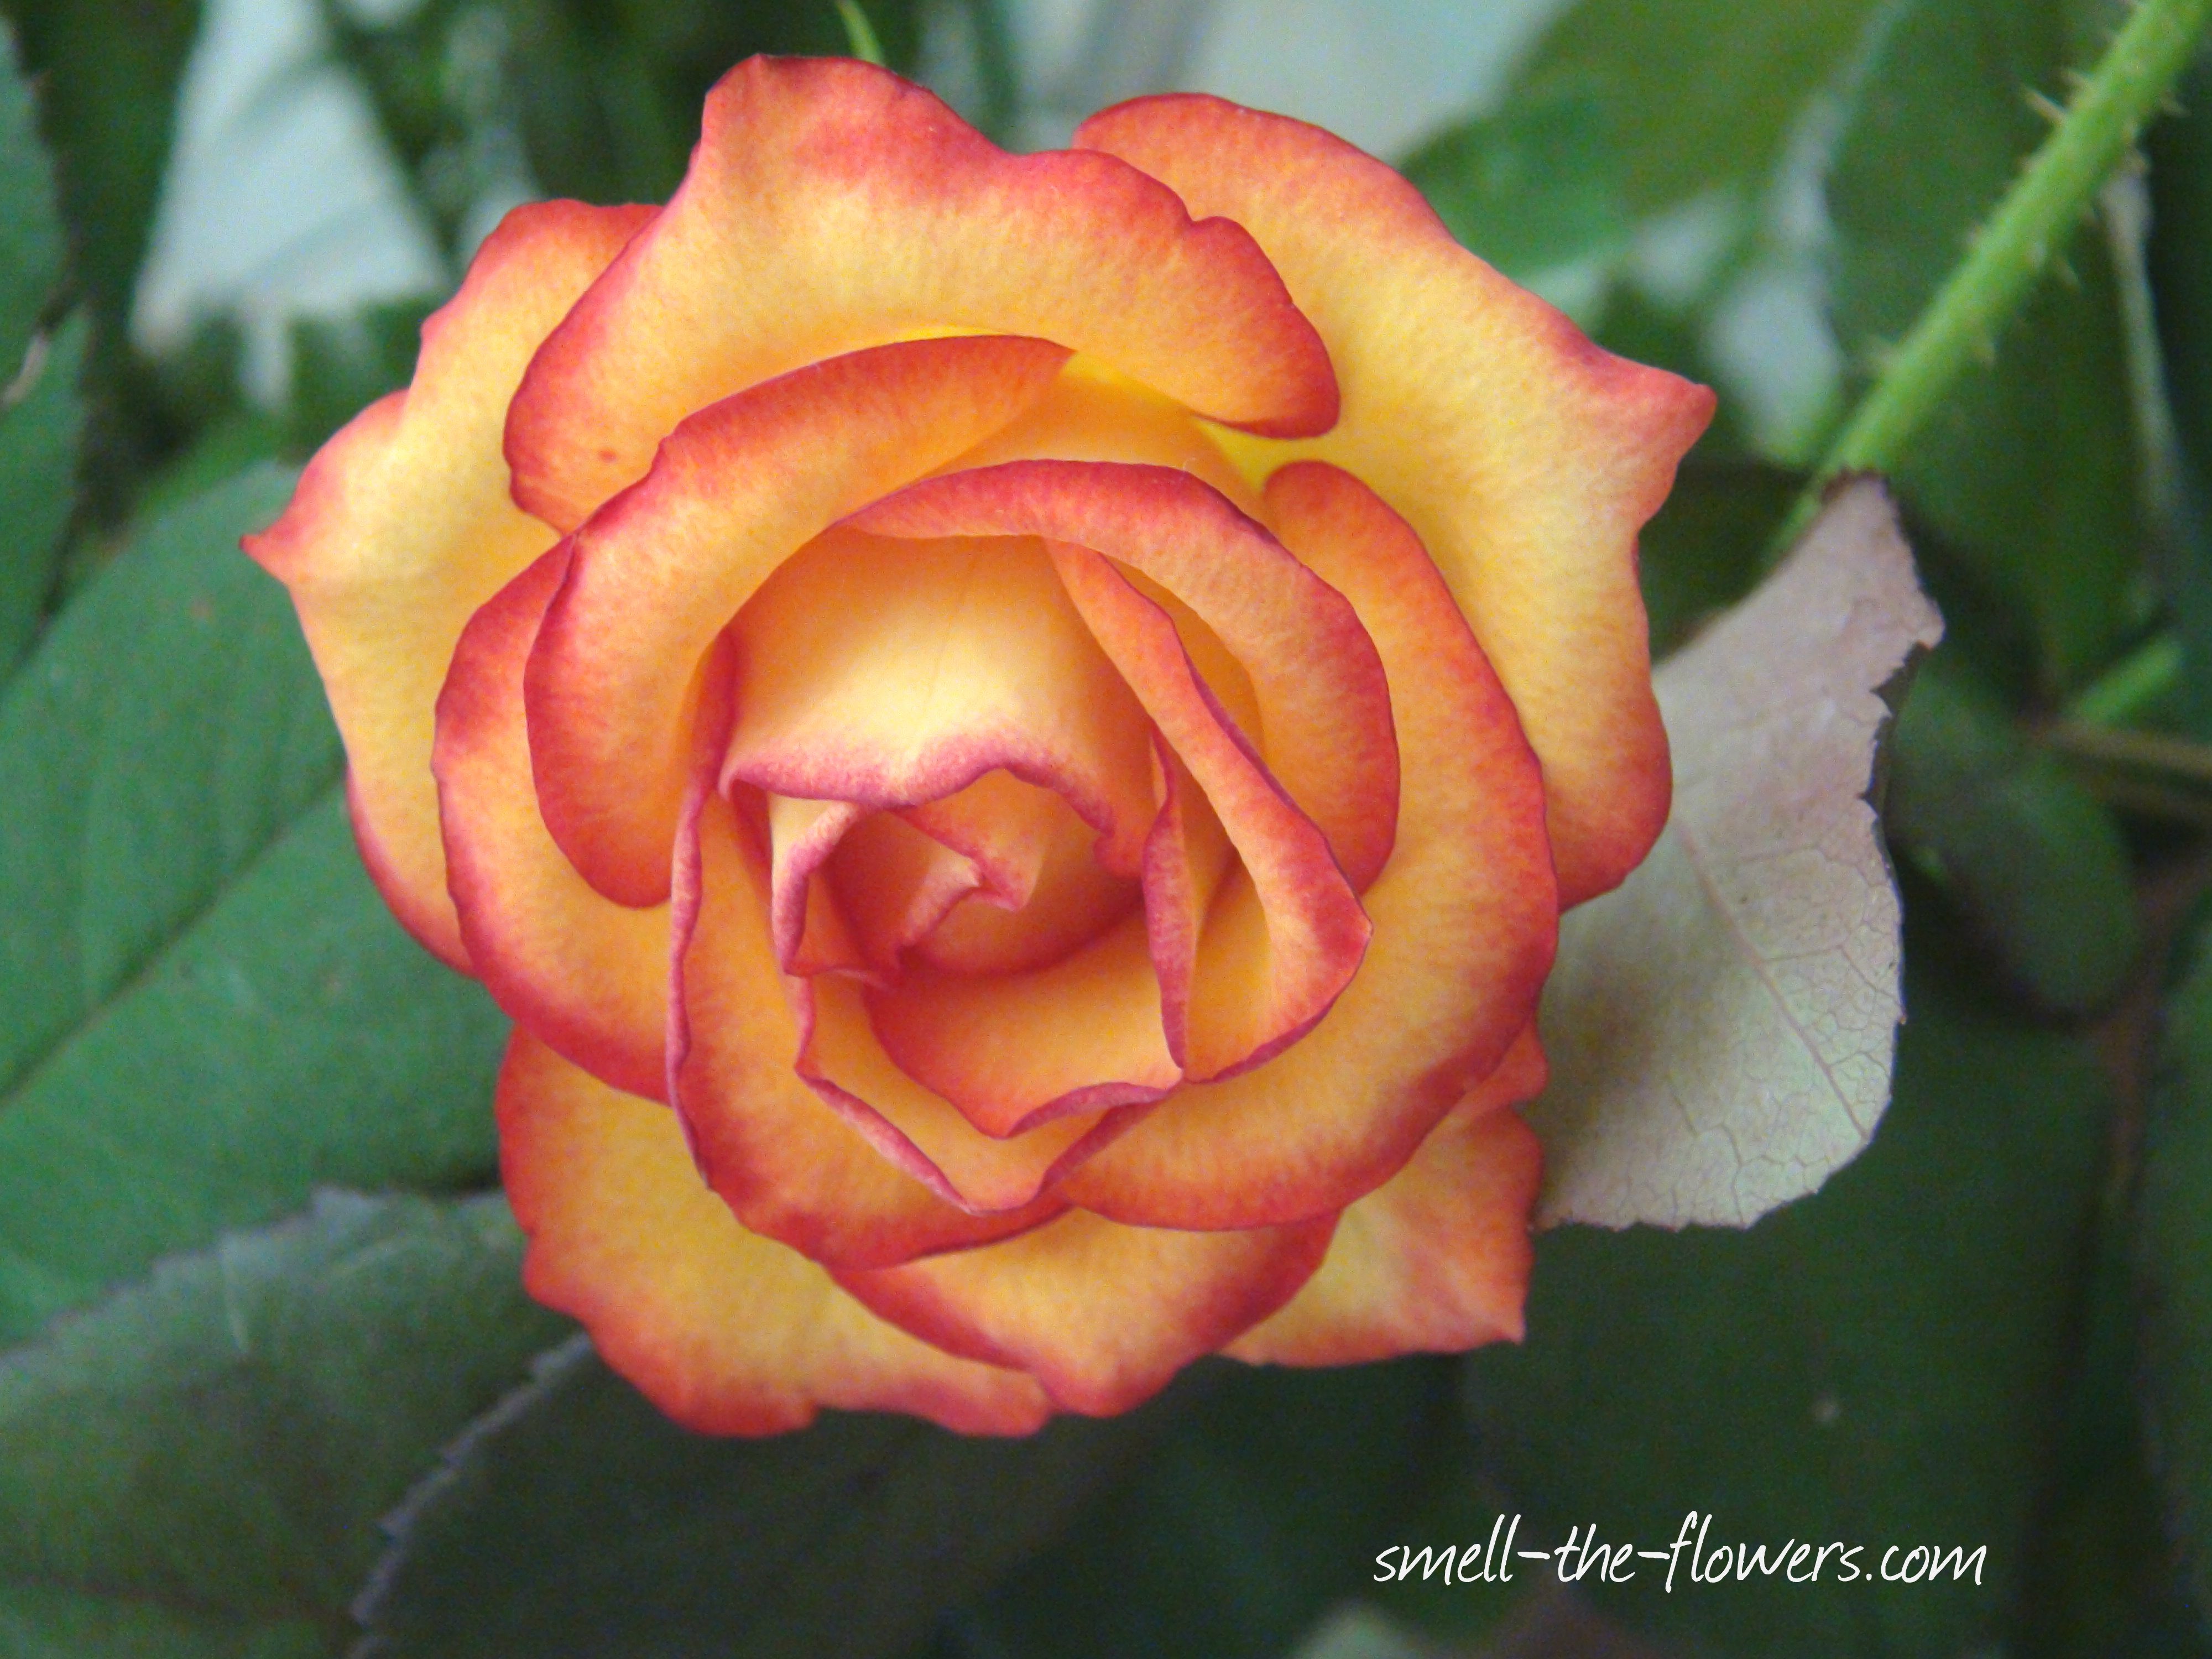 picture of roses | smell the flowers blog